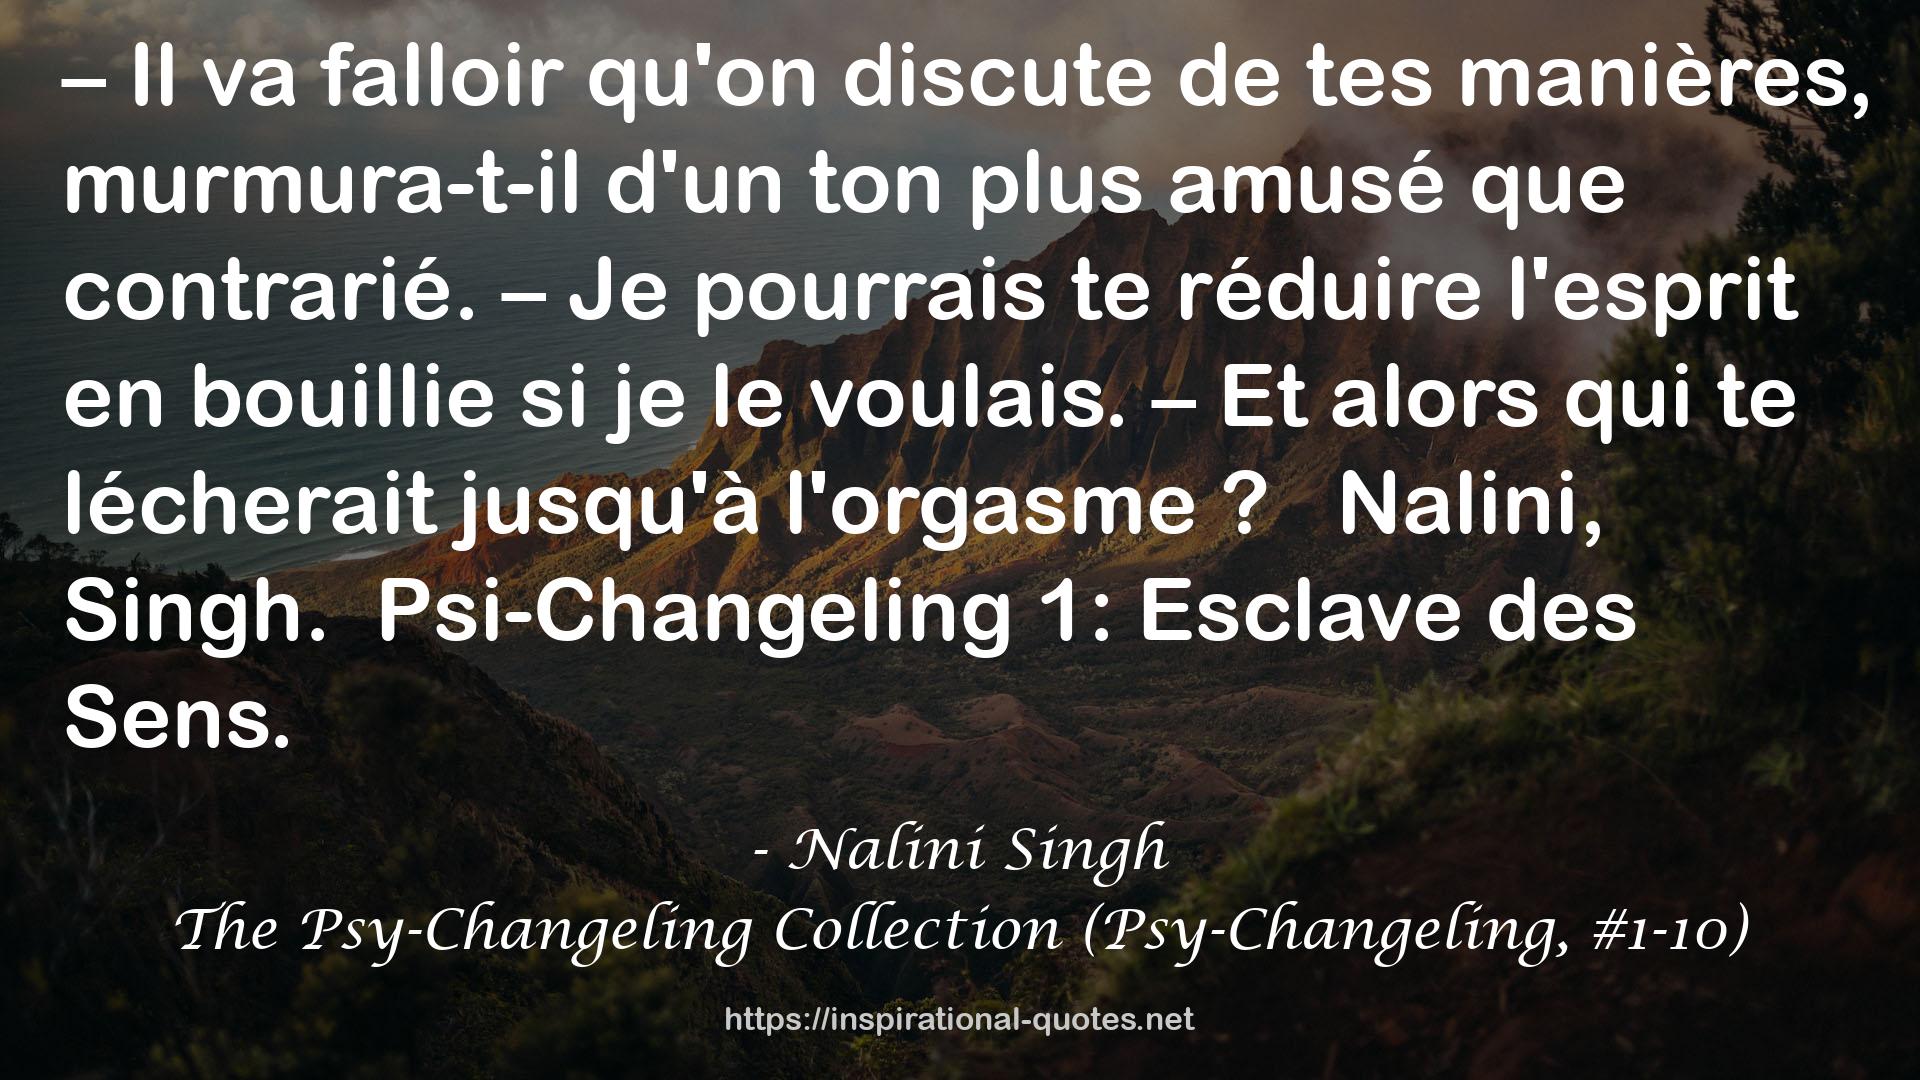 The Psy-Changeling Collection (Psy-Changeling, #1-10) QUOTES